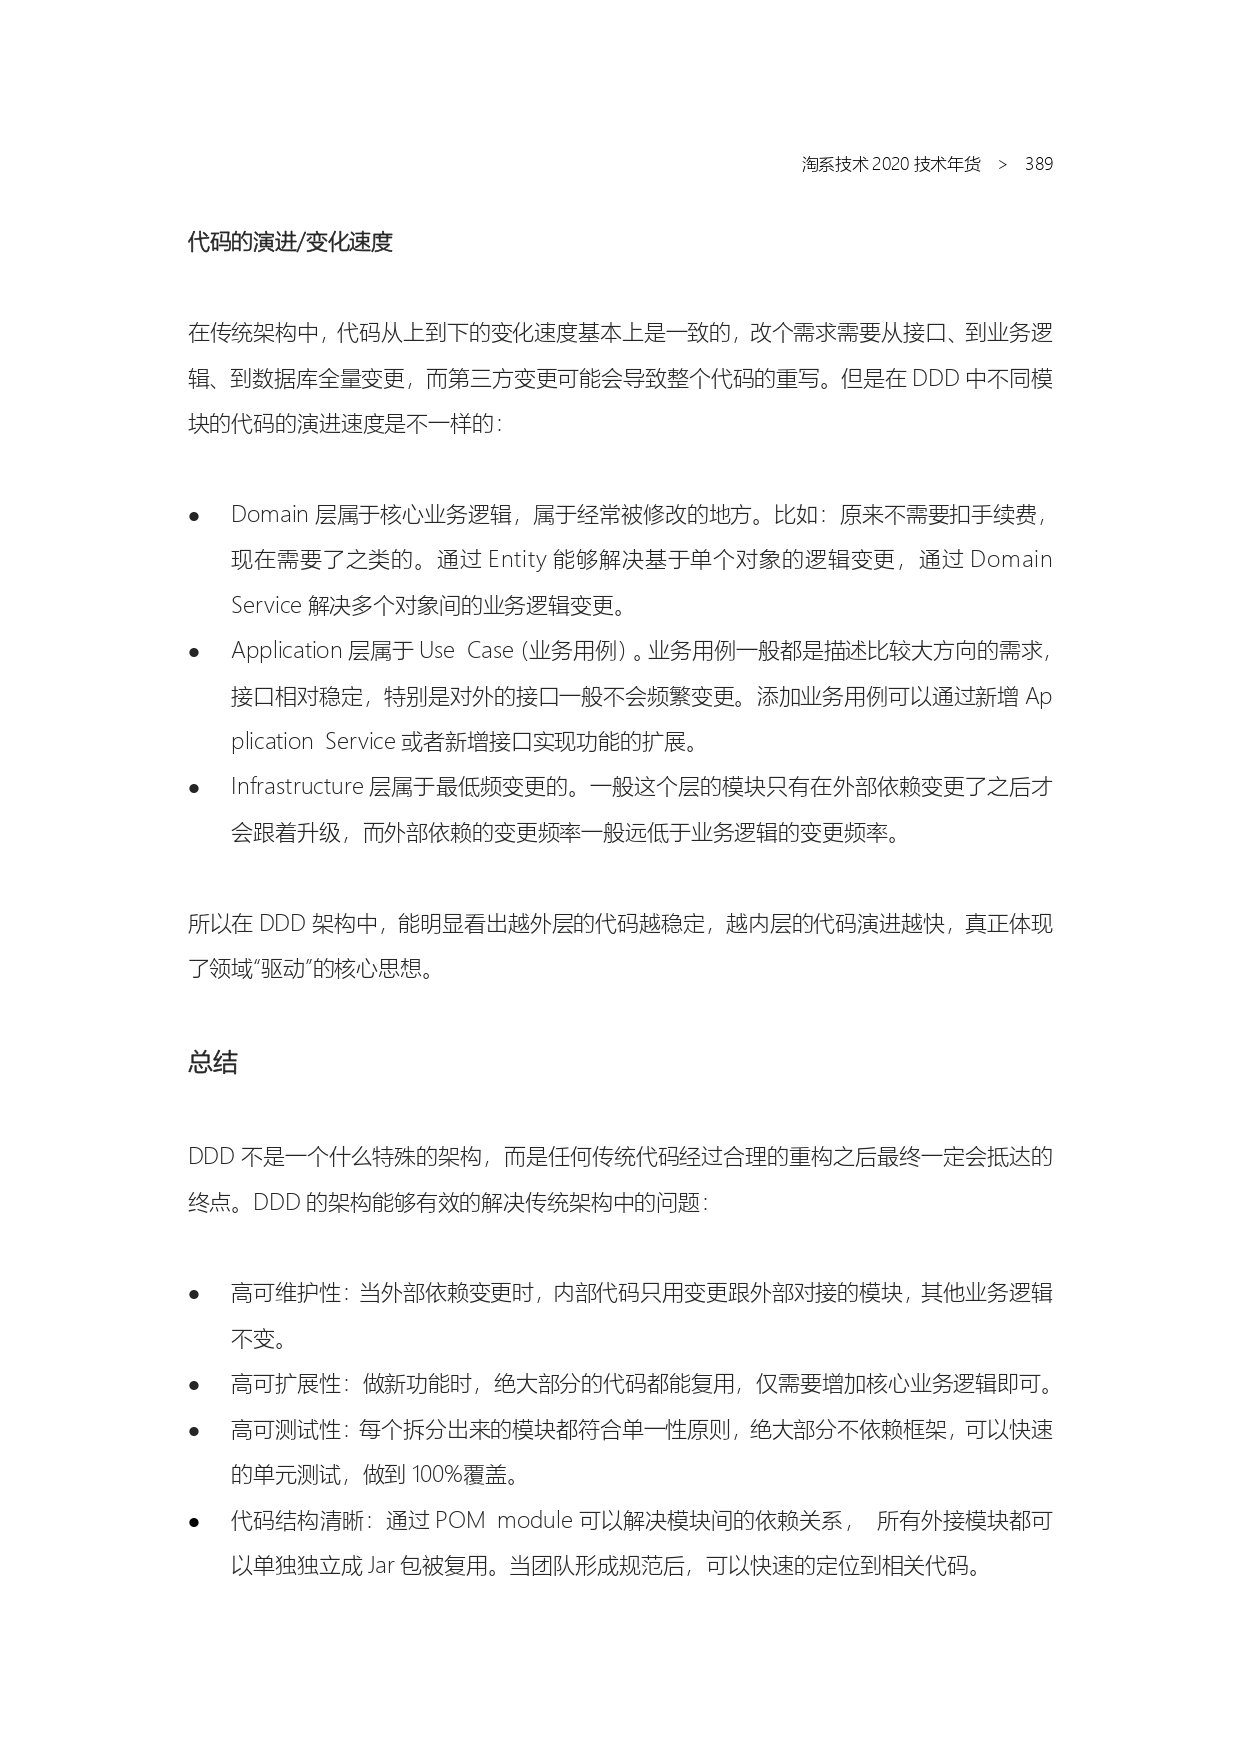 The Complete Works of Tao Technology 2020-1-570_page-0389.jpg